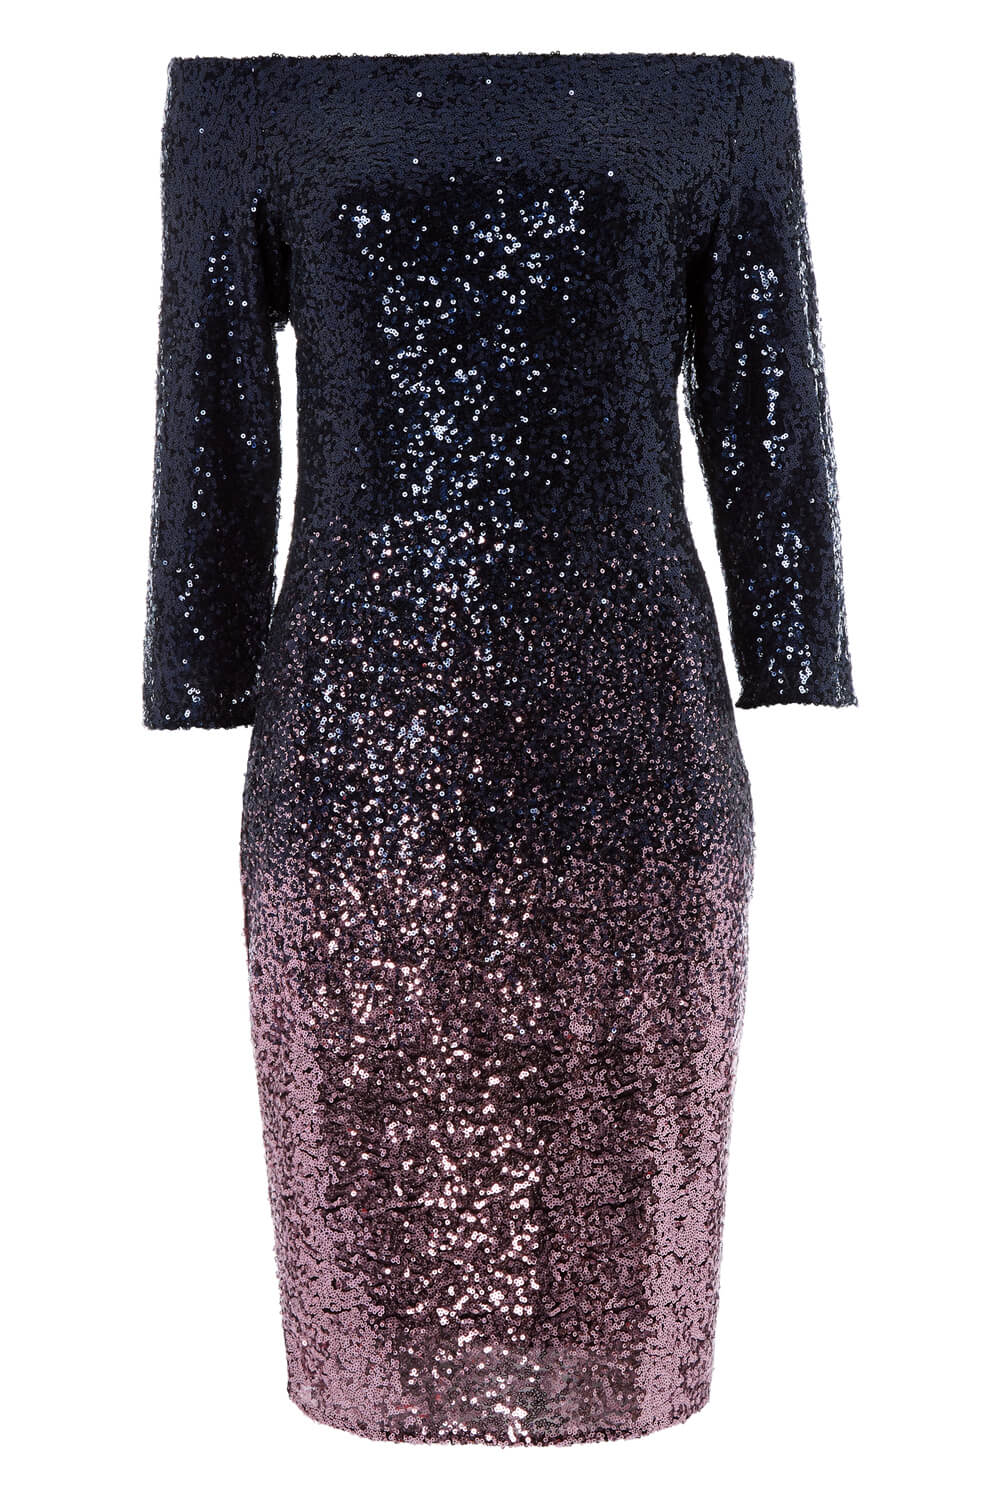 Navy  Ombre Sequin Bardot Dress, Image 5 of 5